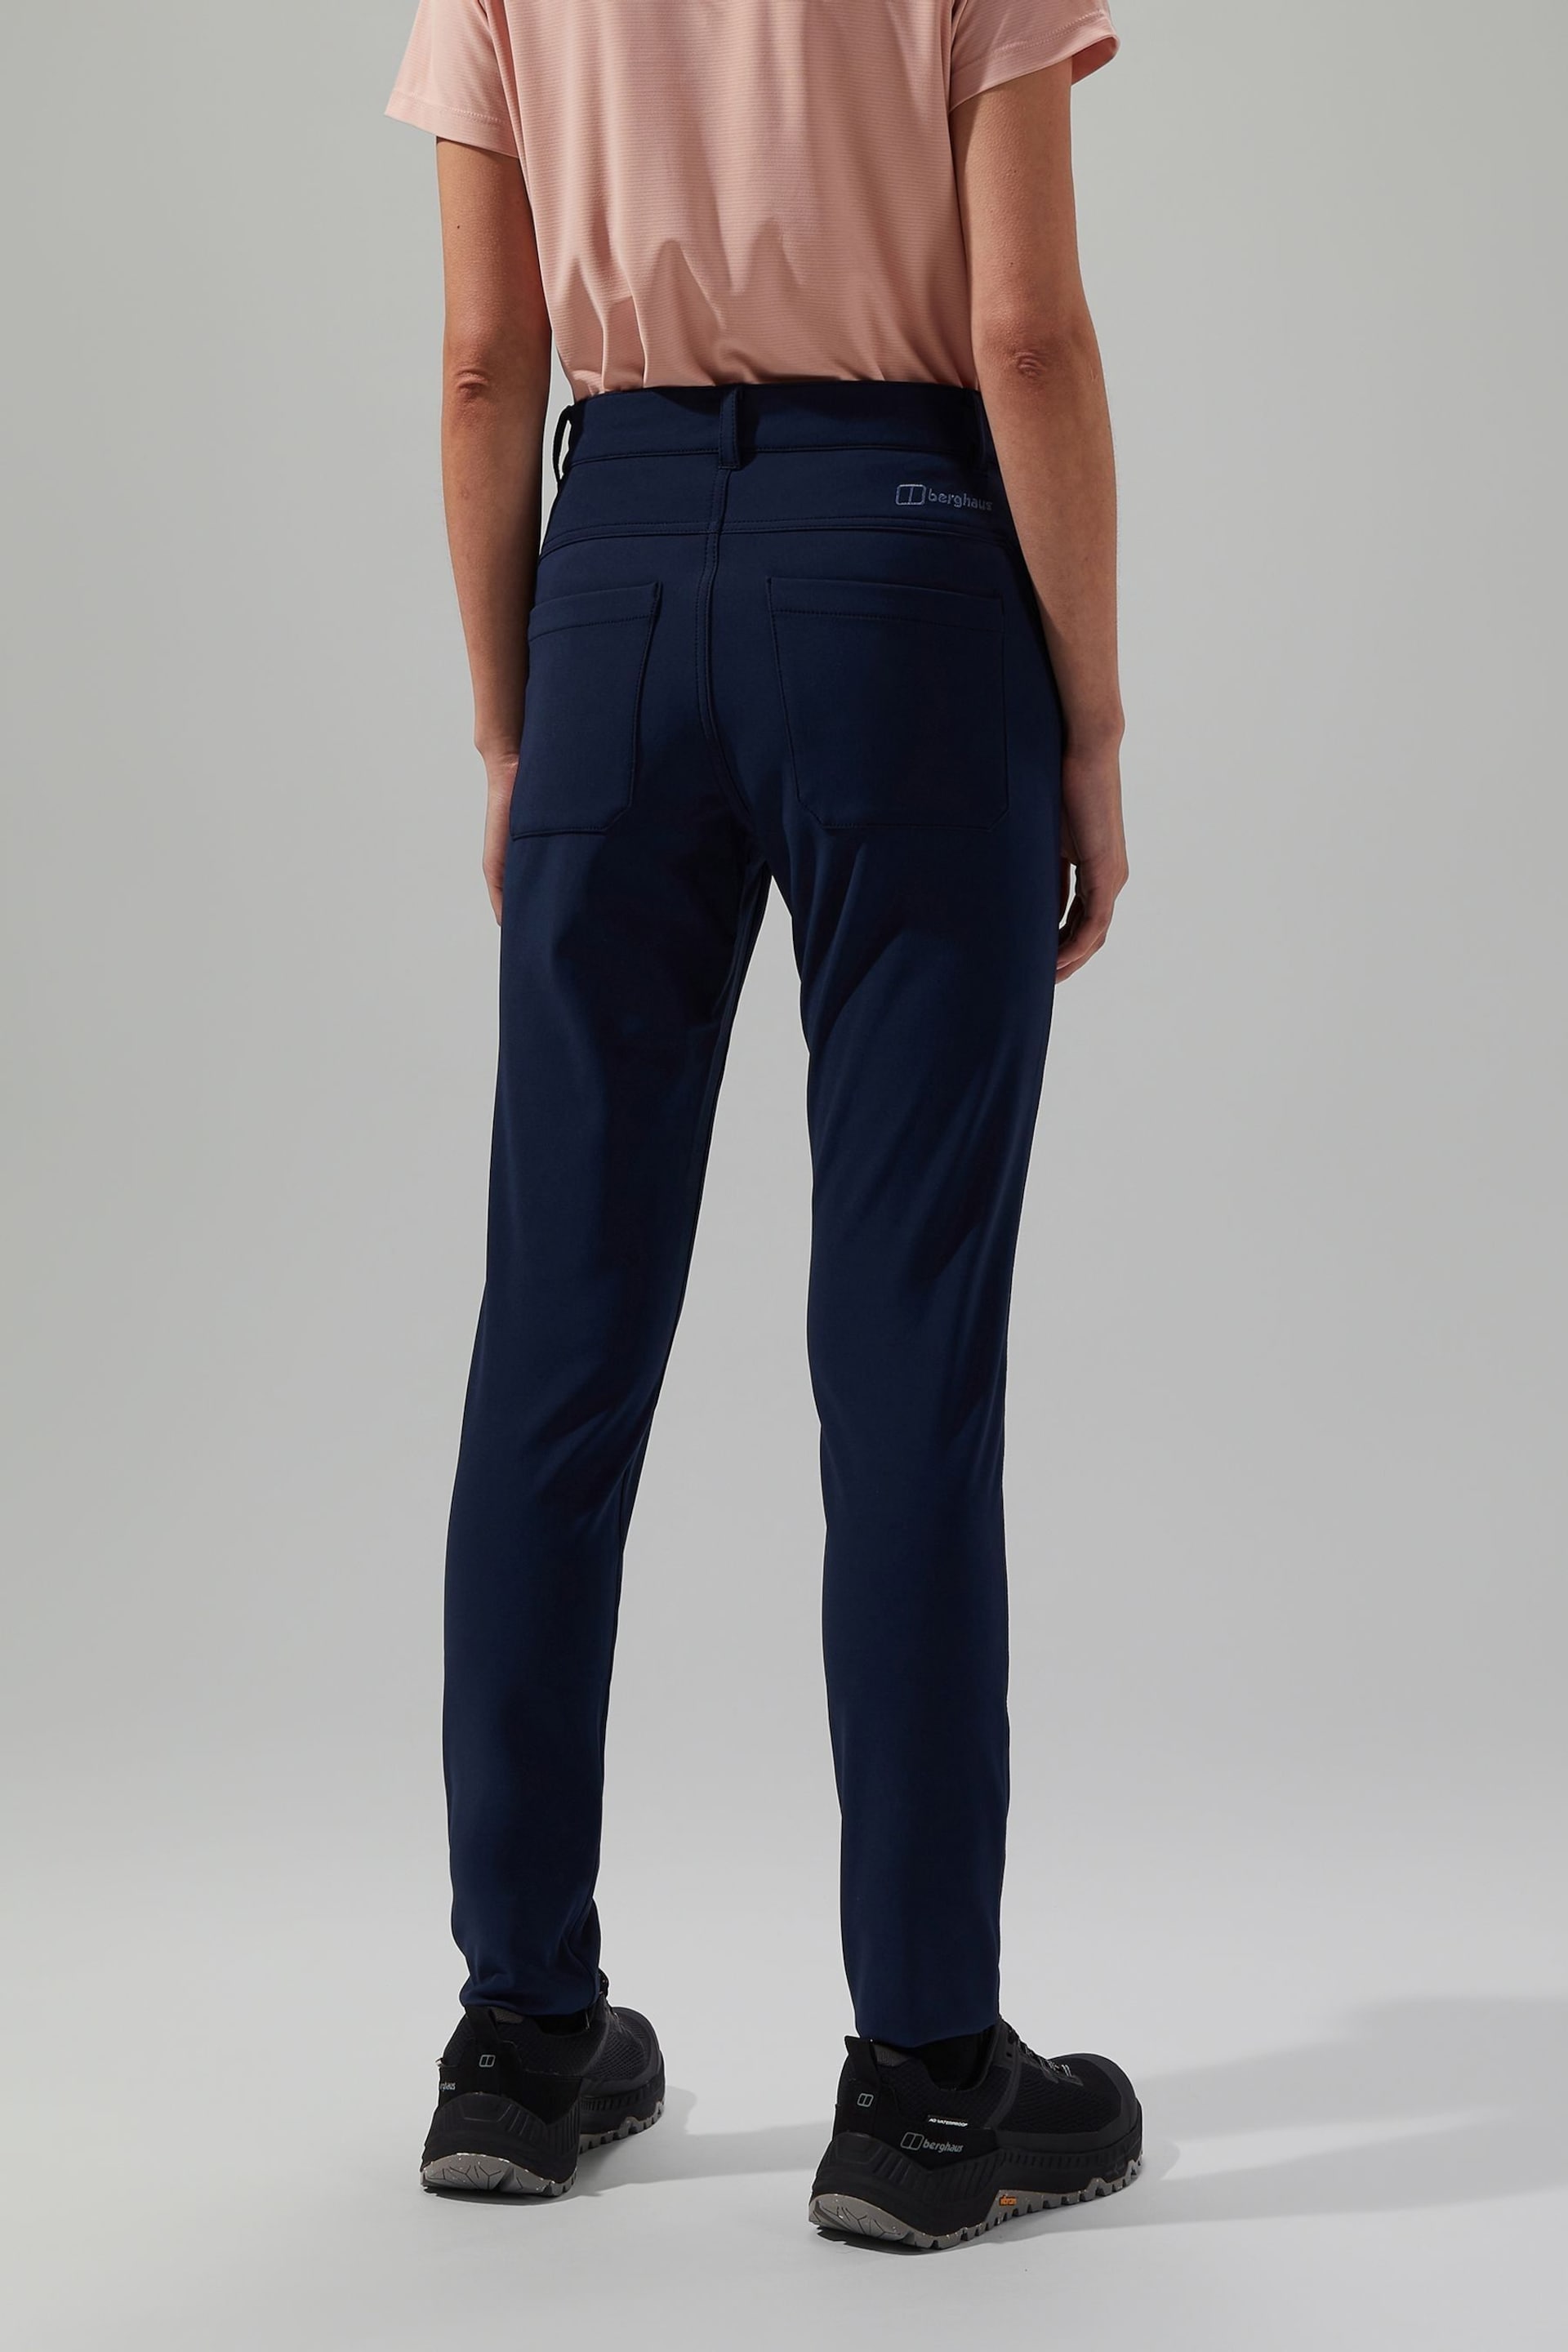 Berghaus Everyday Skinny Stretch Trousers - Image 3 of 7